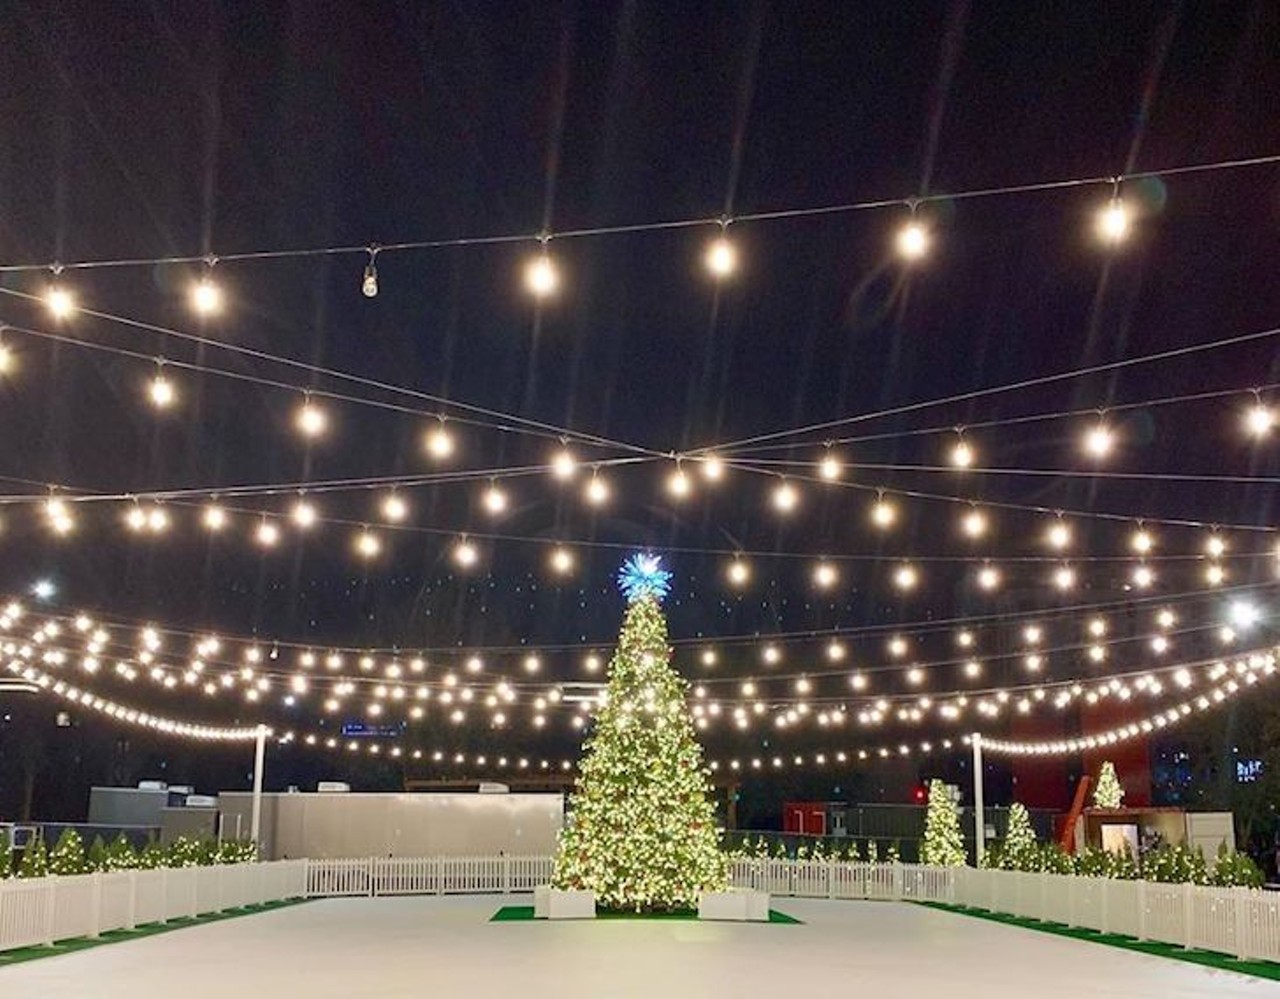 OH WHAT FUN! Lake Nona Festival  
6900 Tavistock Lakes Blvd., 407-888-6500
The second annual OH WHAT FUN! Lake Nona Festival will begin on Nov. 29 through Jan. 5 from 4 p.m. to 10p.m. In addition to lights, there will be carolers, ice skating and a mailbox for letters to Santa.
Photo via Lake Nona/Facebook